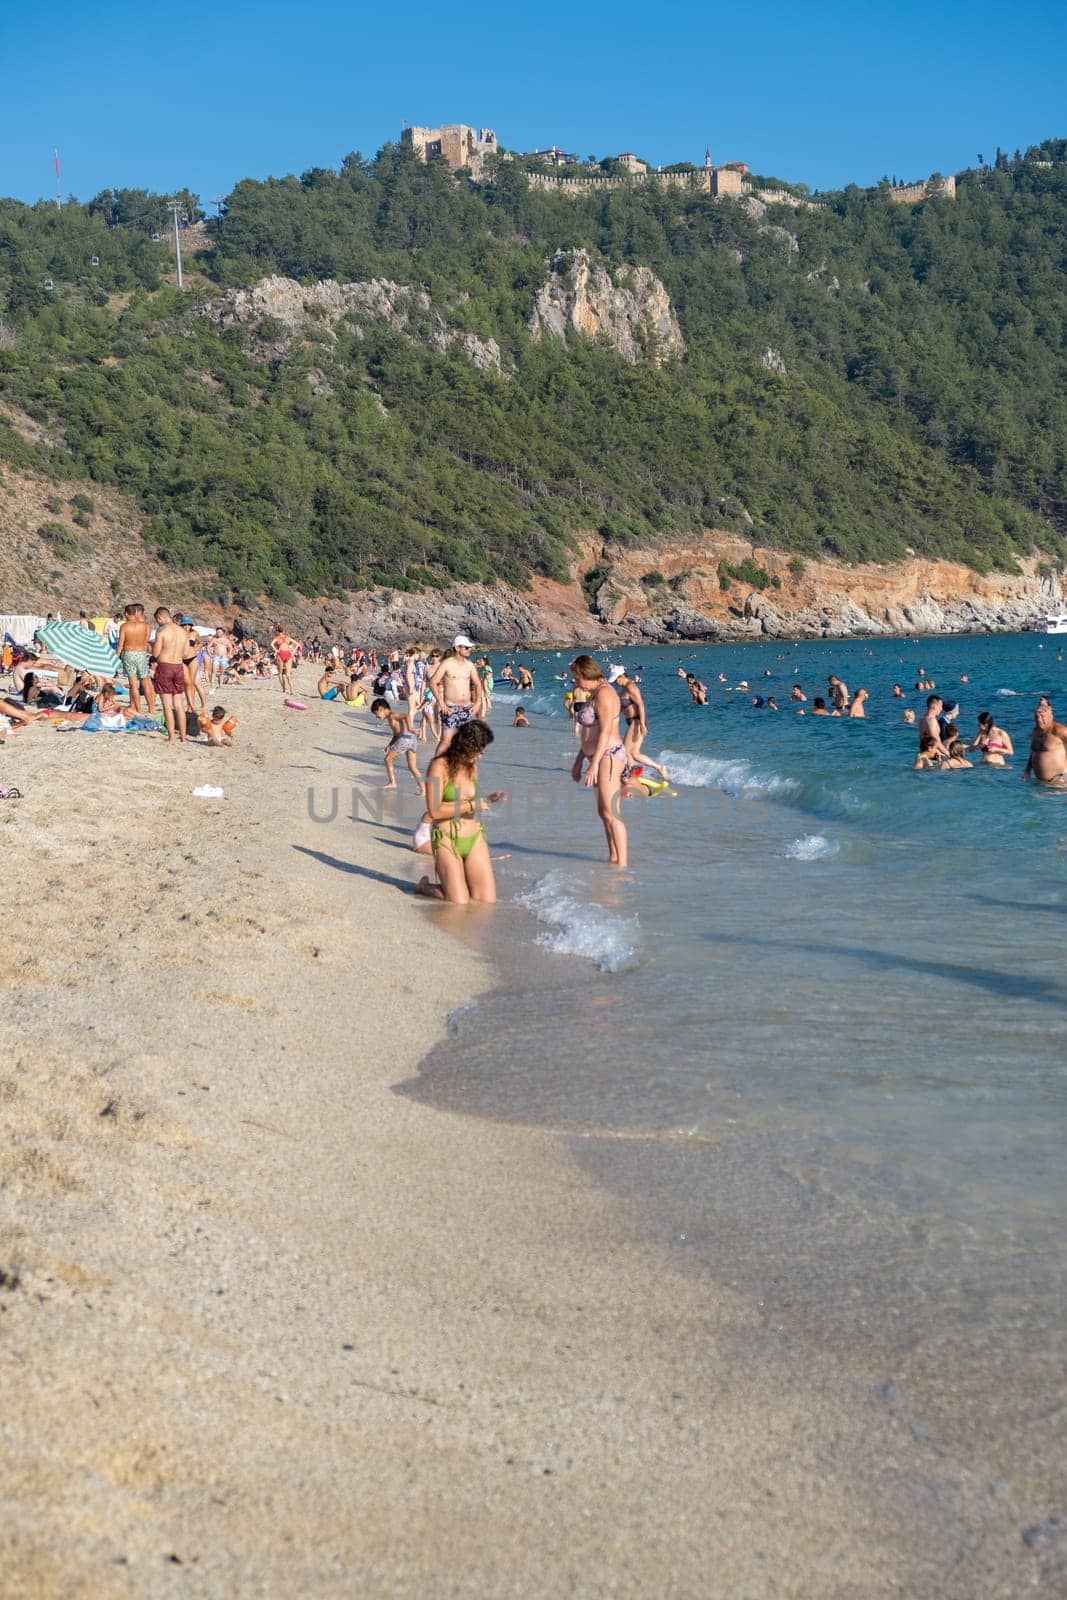 Alanya, Turkey, 02. 07. 2021. People Crowd Relaxing On Beach. Swimming people in sea. The best beach in Turkey with turquoise waters, Mediterranean Sea